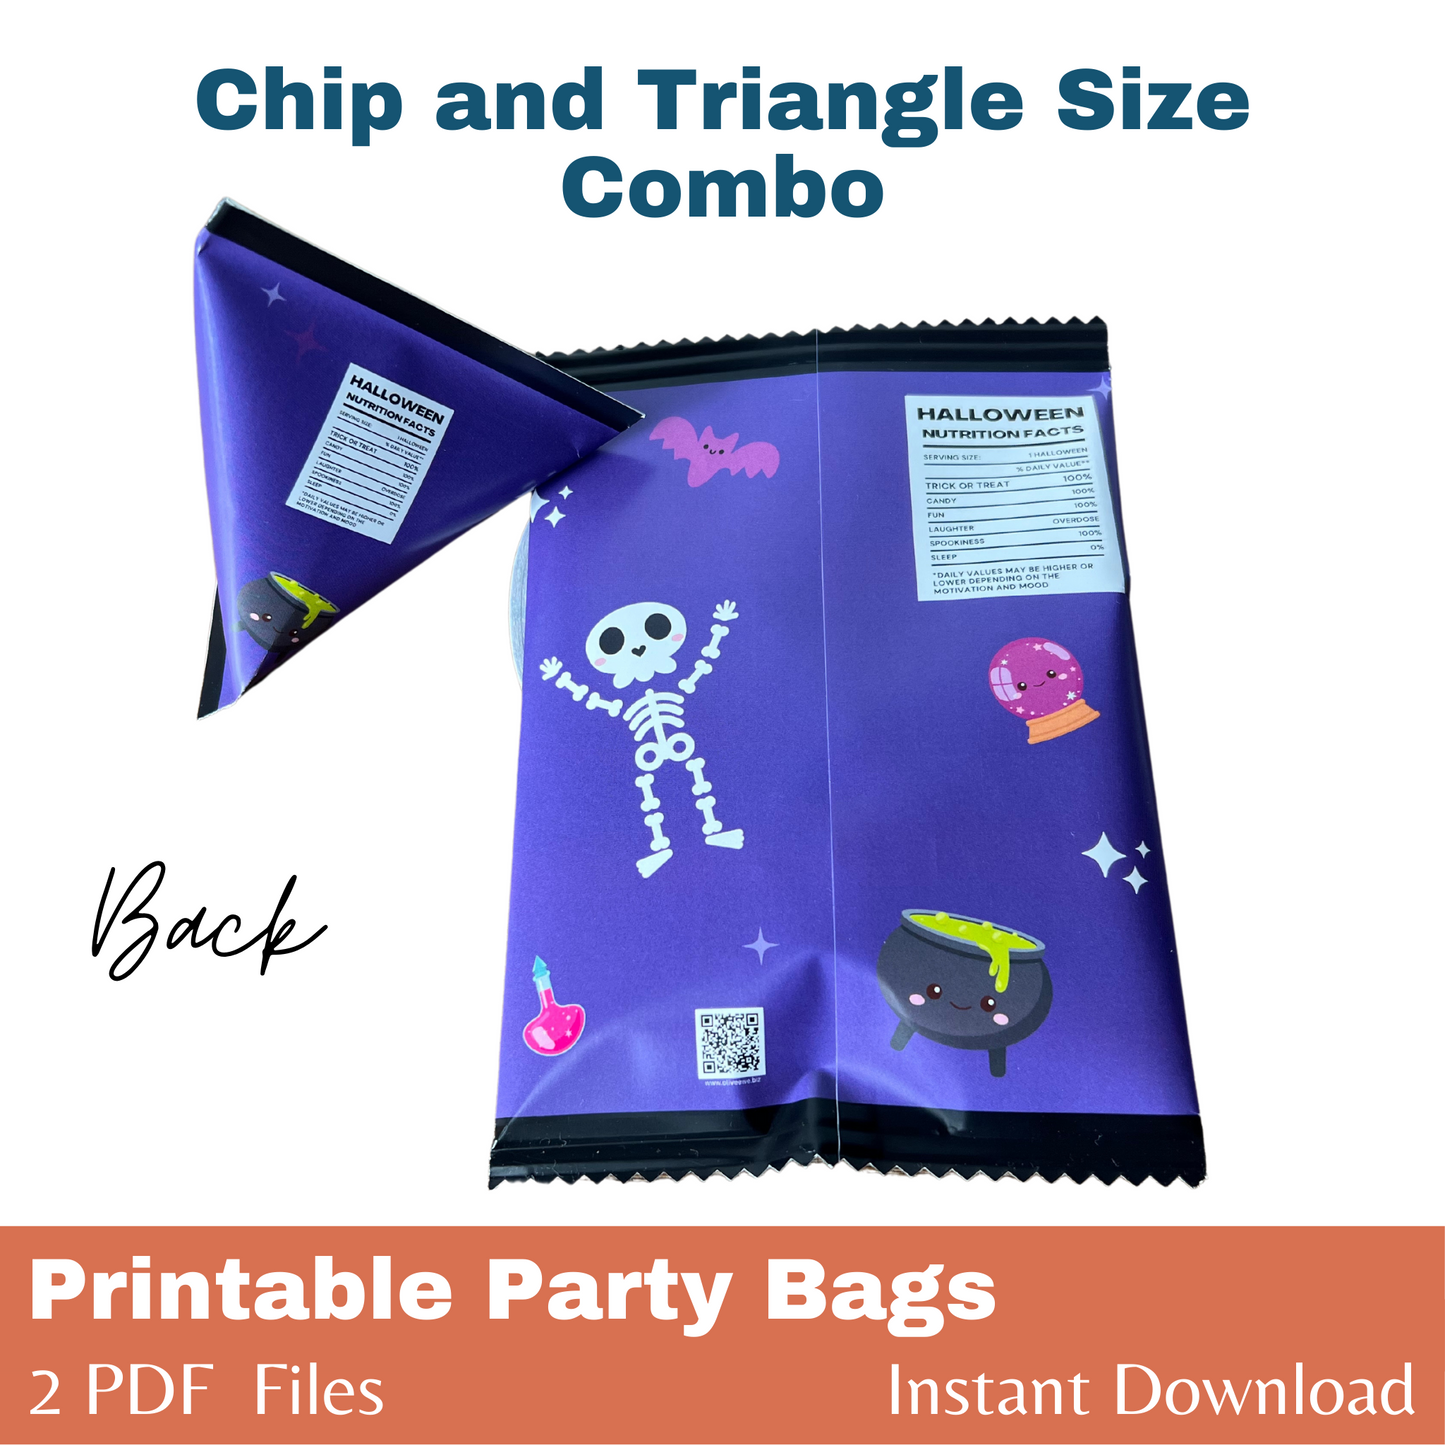 You've been Boo-ed! Party Bag Combo